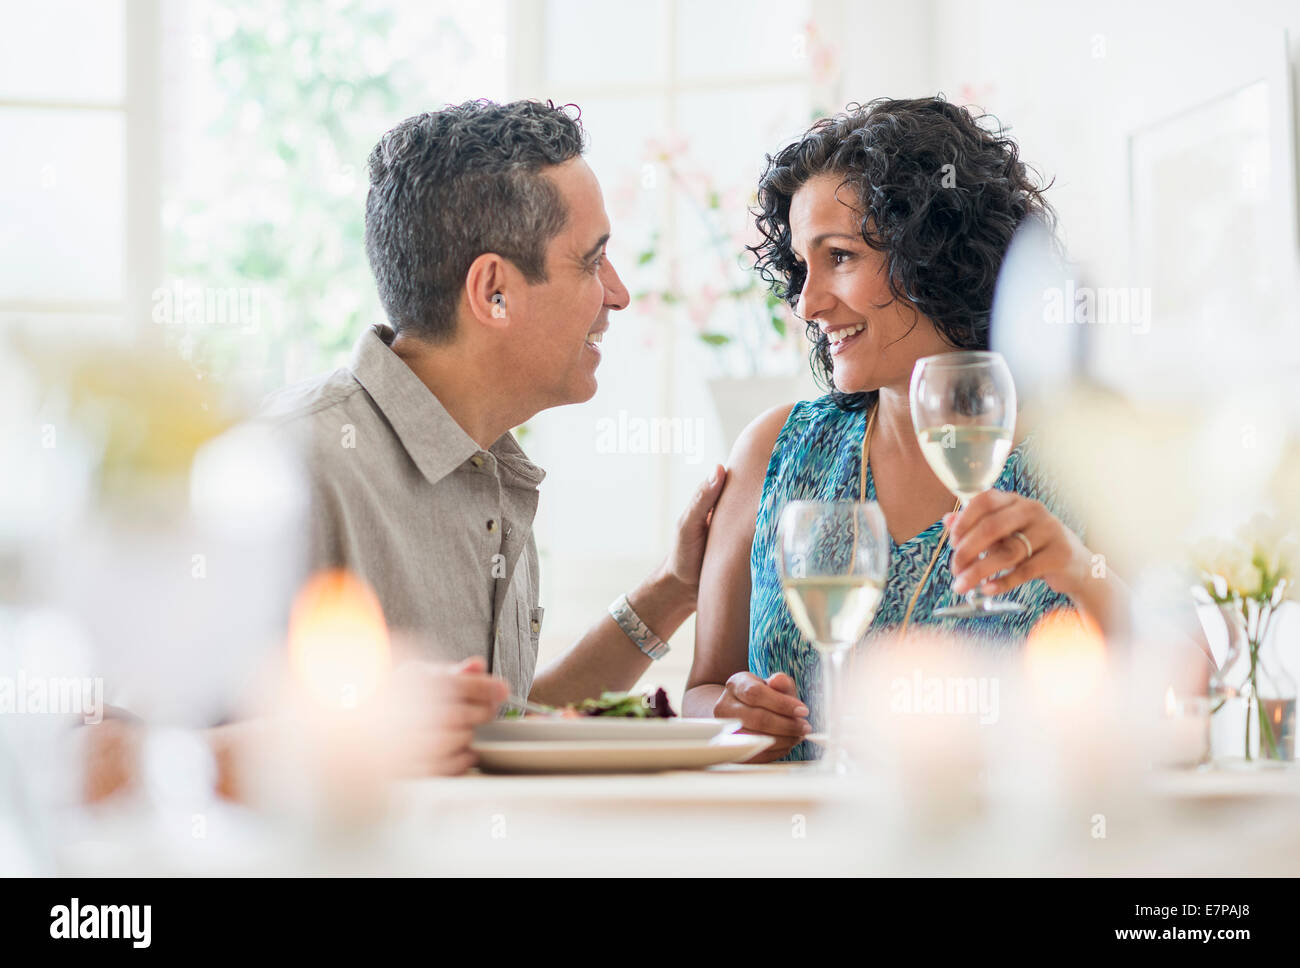 Couple dining in restaurant Stock Photo